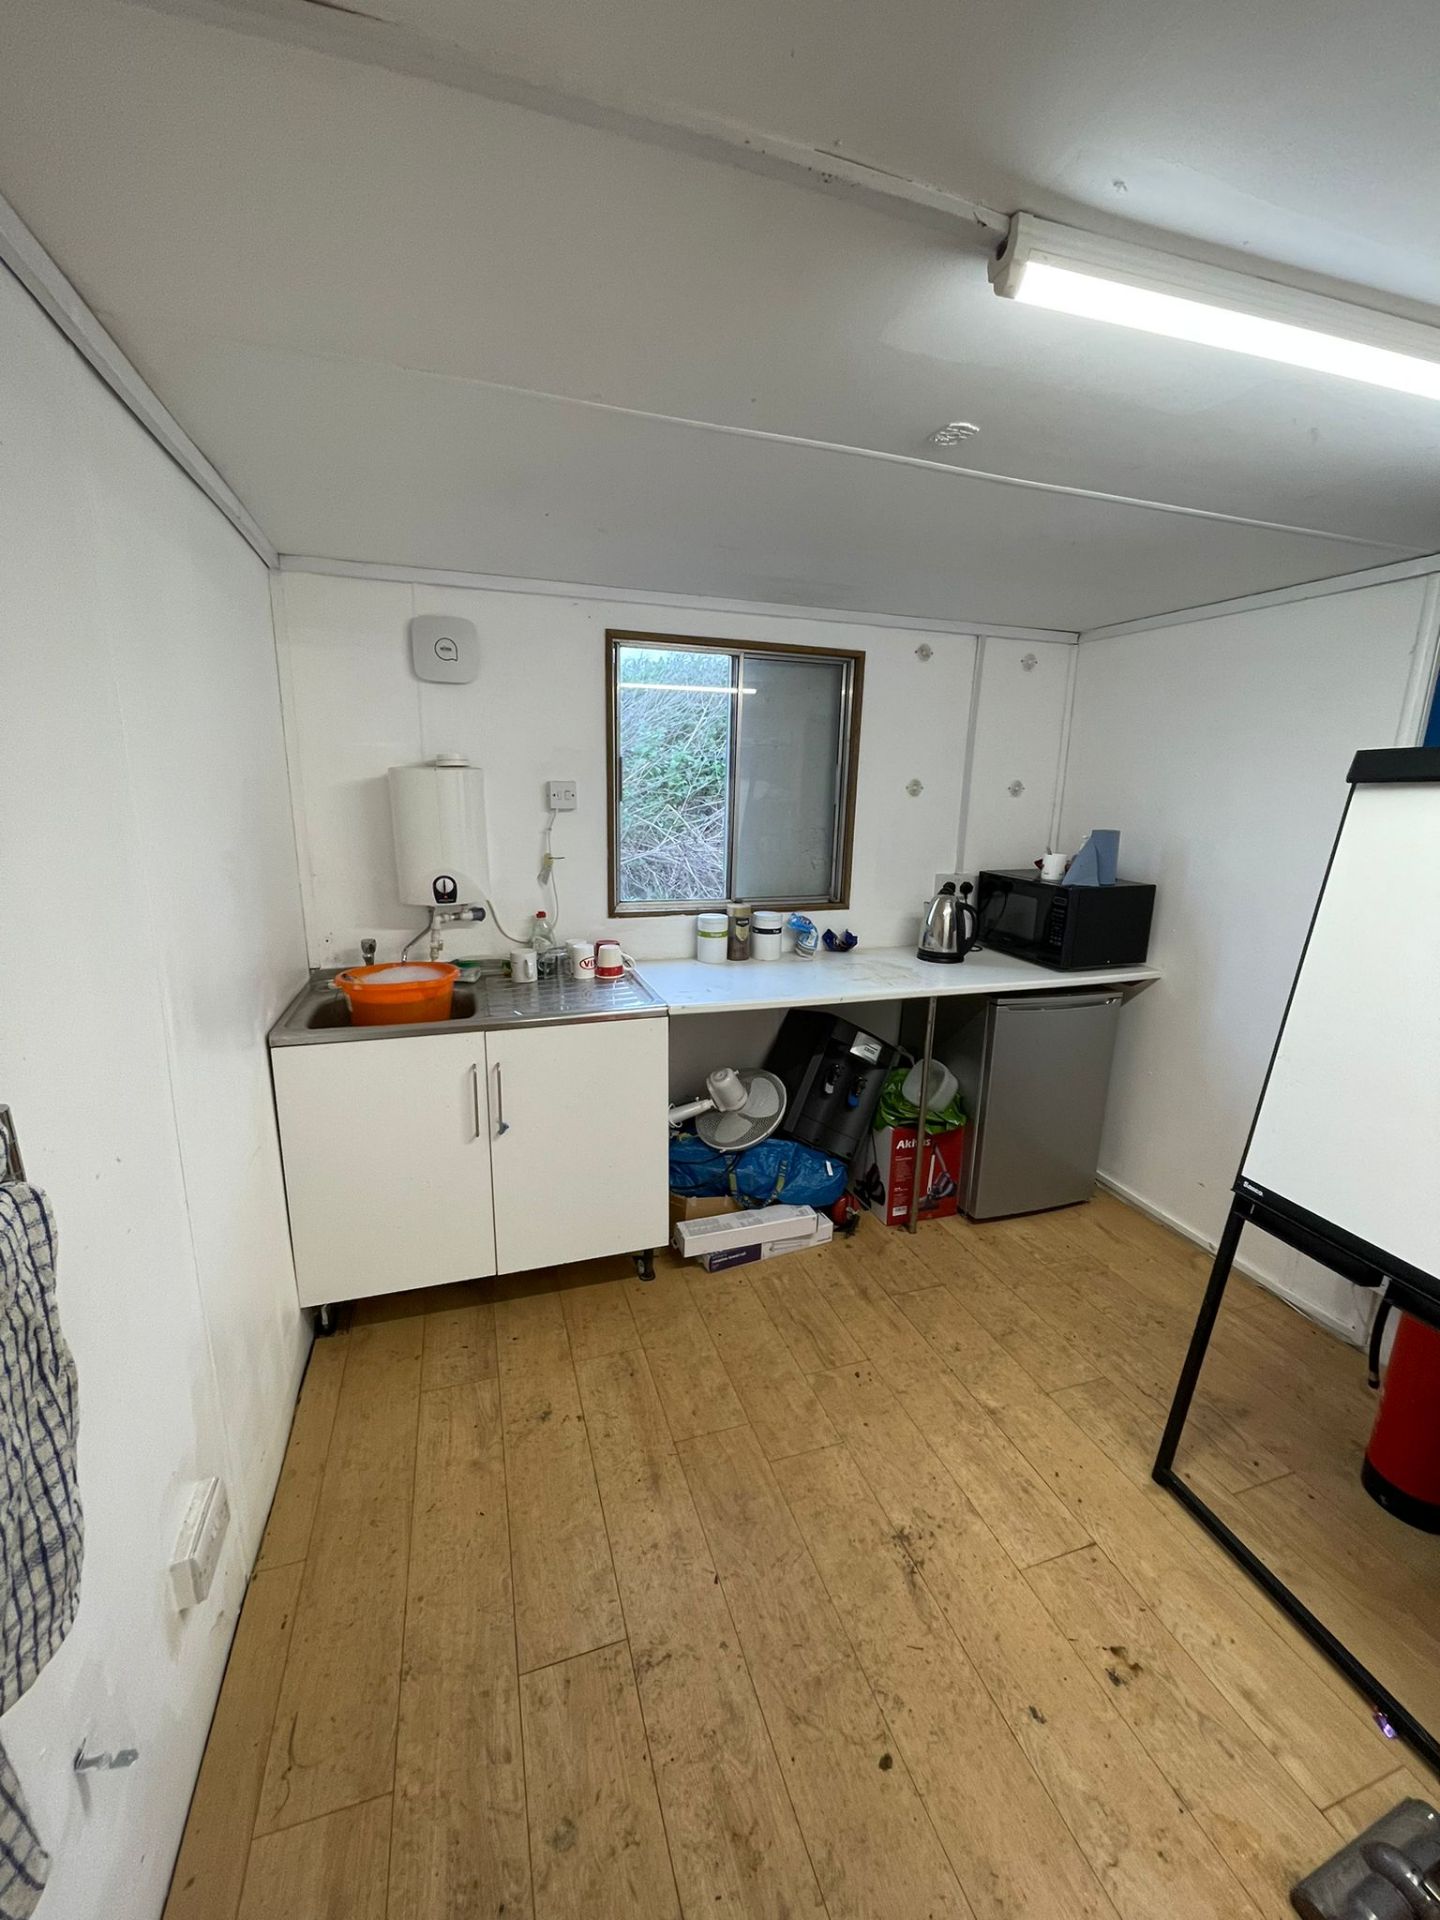 32FT X 10FT ANTI-VANDAL CABIN - OFFICE/ TRAINING ROOM AND SMALL CANTEEN AREA. - Image 6 of 8